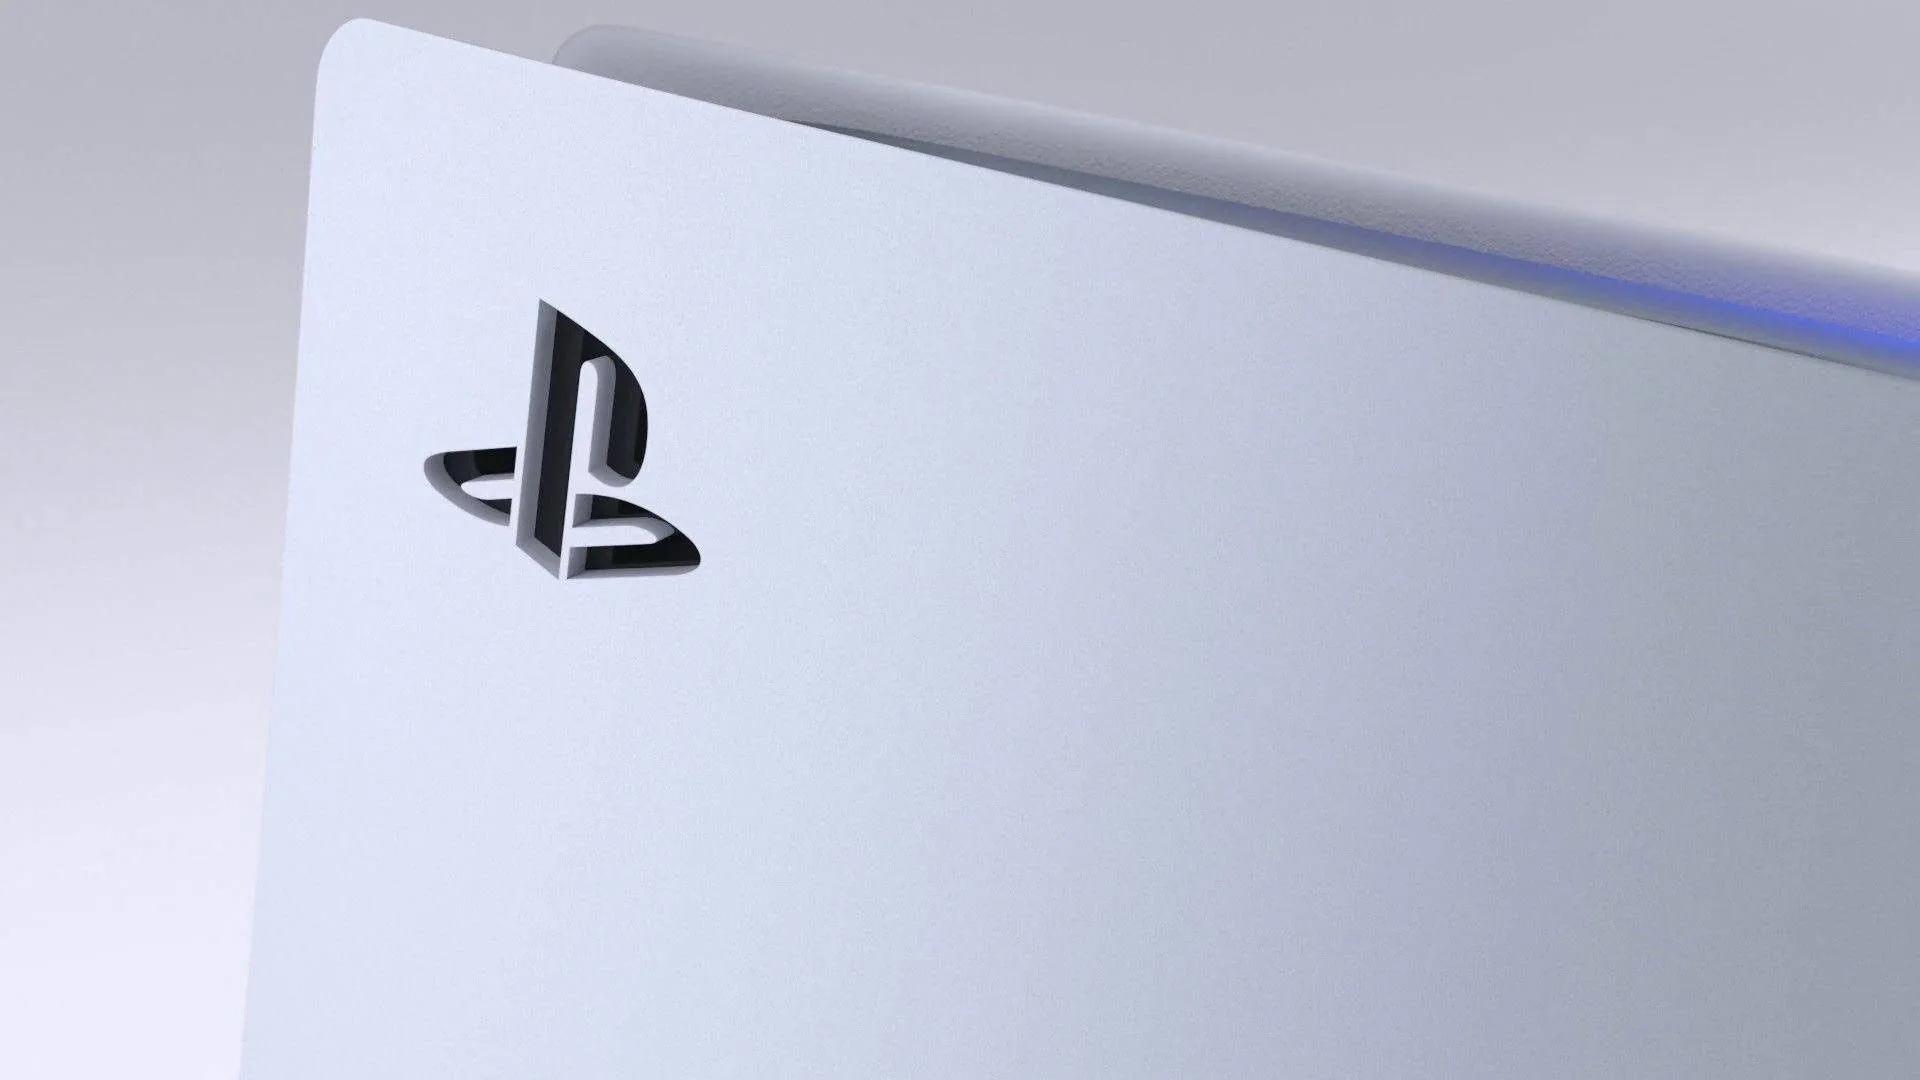 Revealed: Technical Specifications of the PS5 Pro, Sony’s Next Console